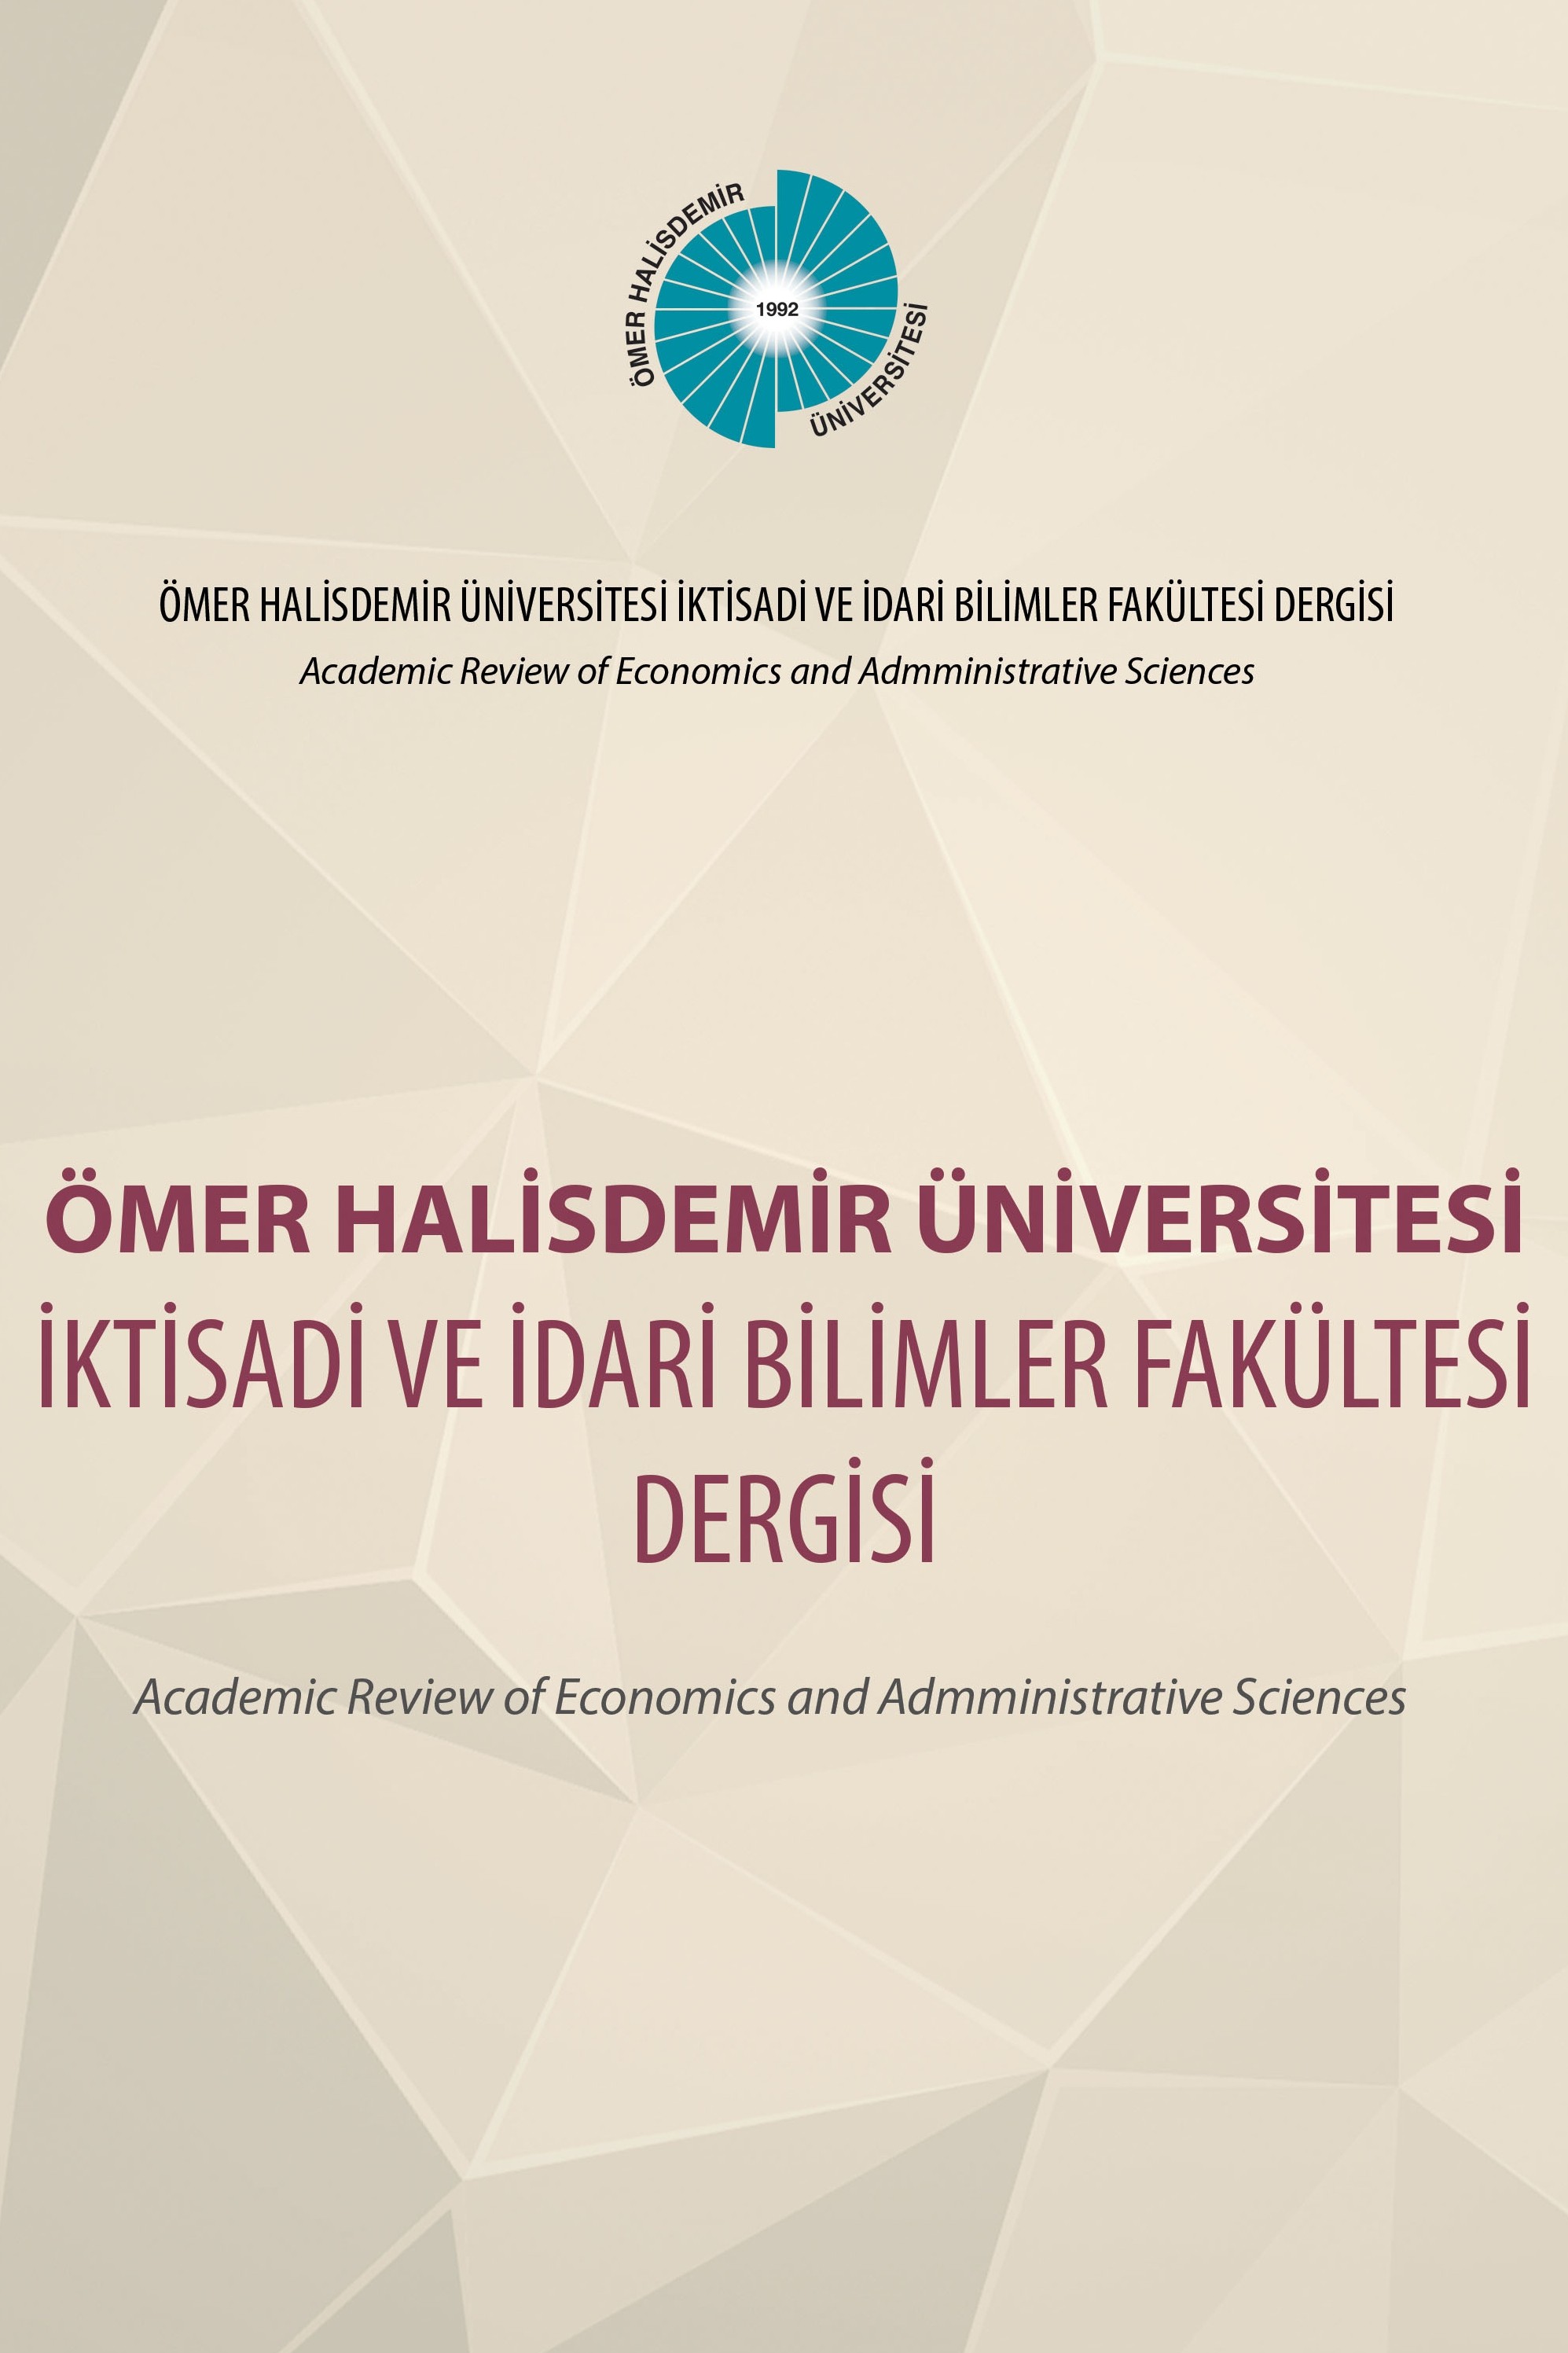 Academic Review of Economics and Administrative Sciences